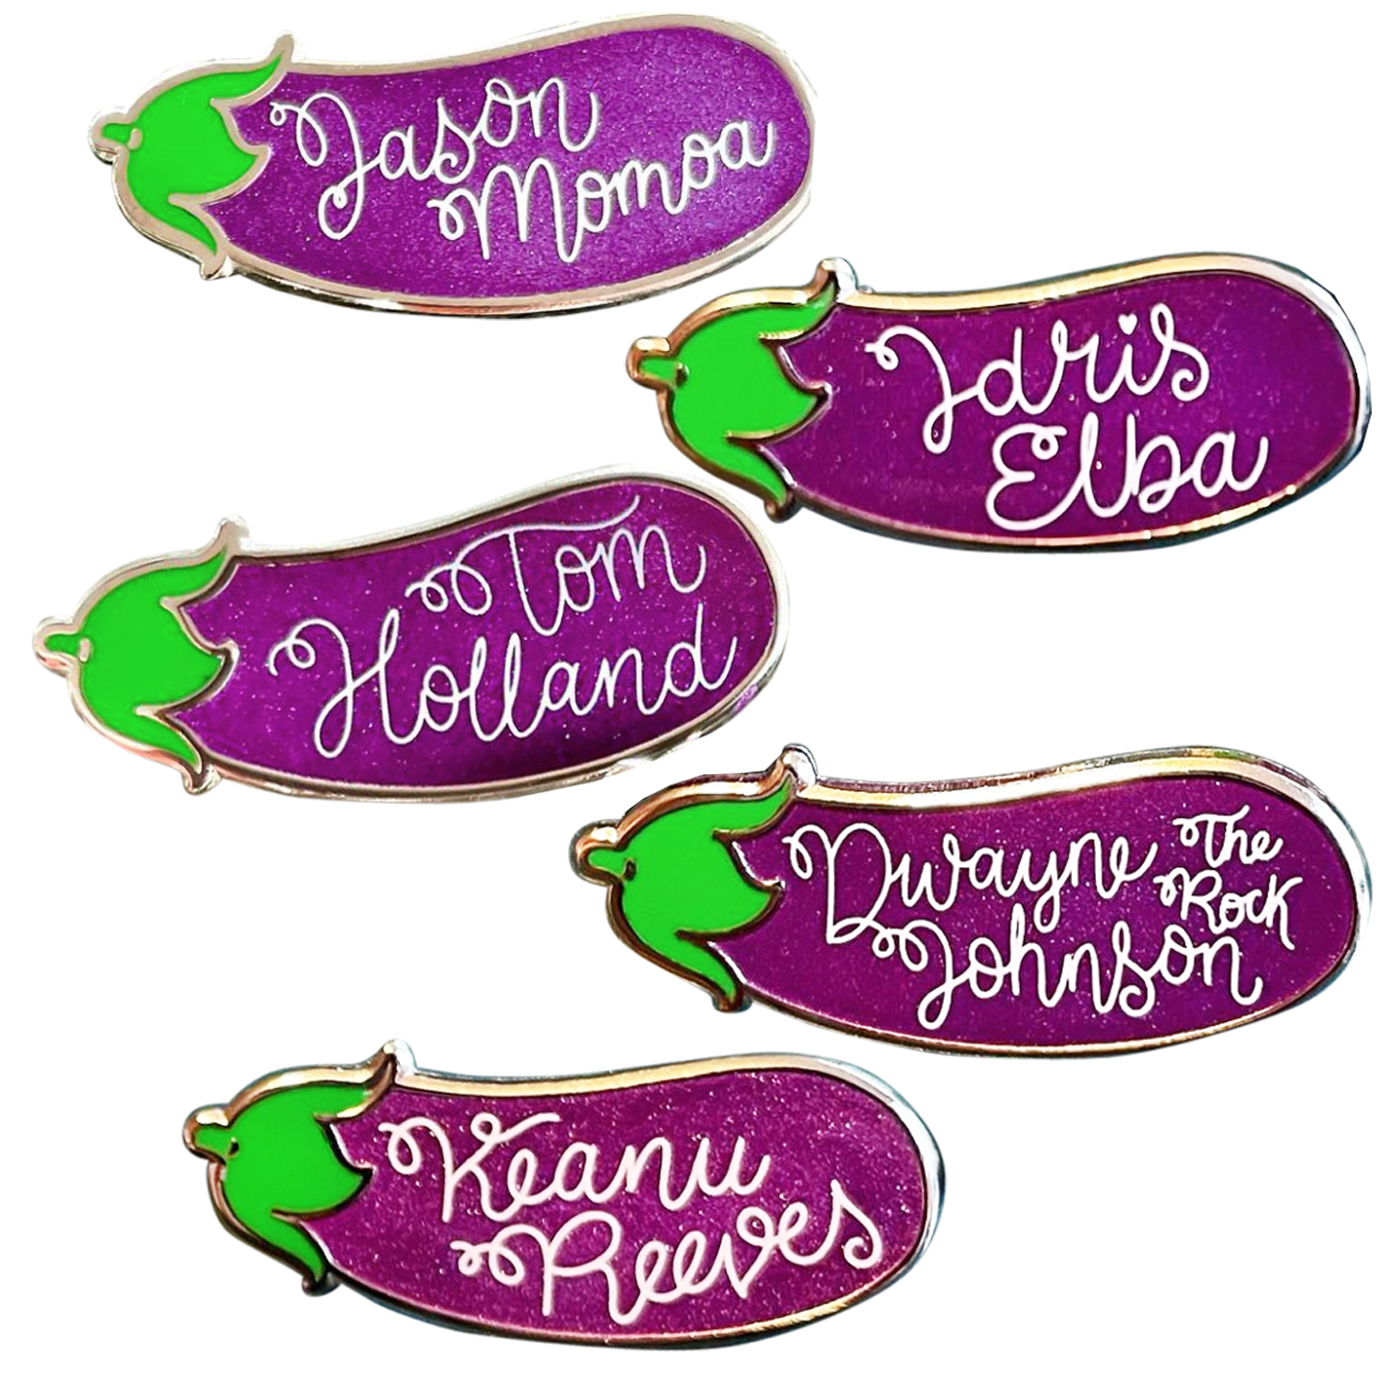 Sexy Eggplant Pins (8 Different Names!)